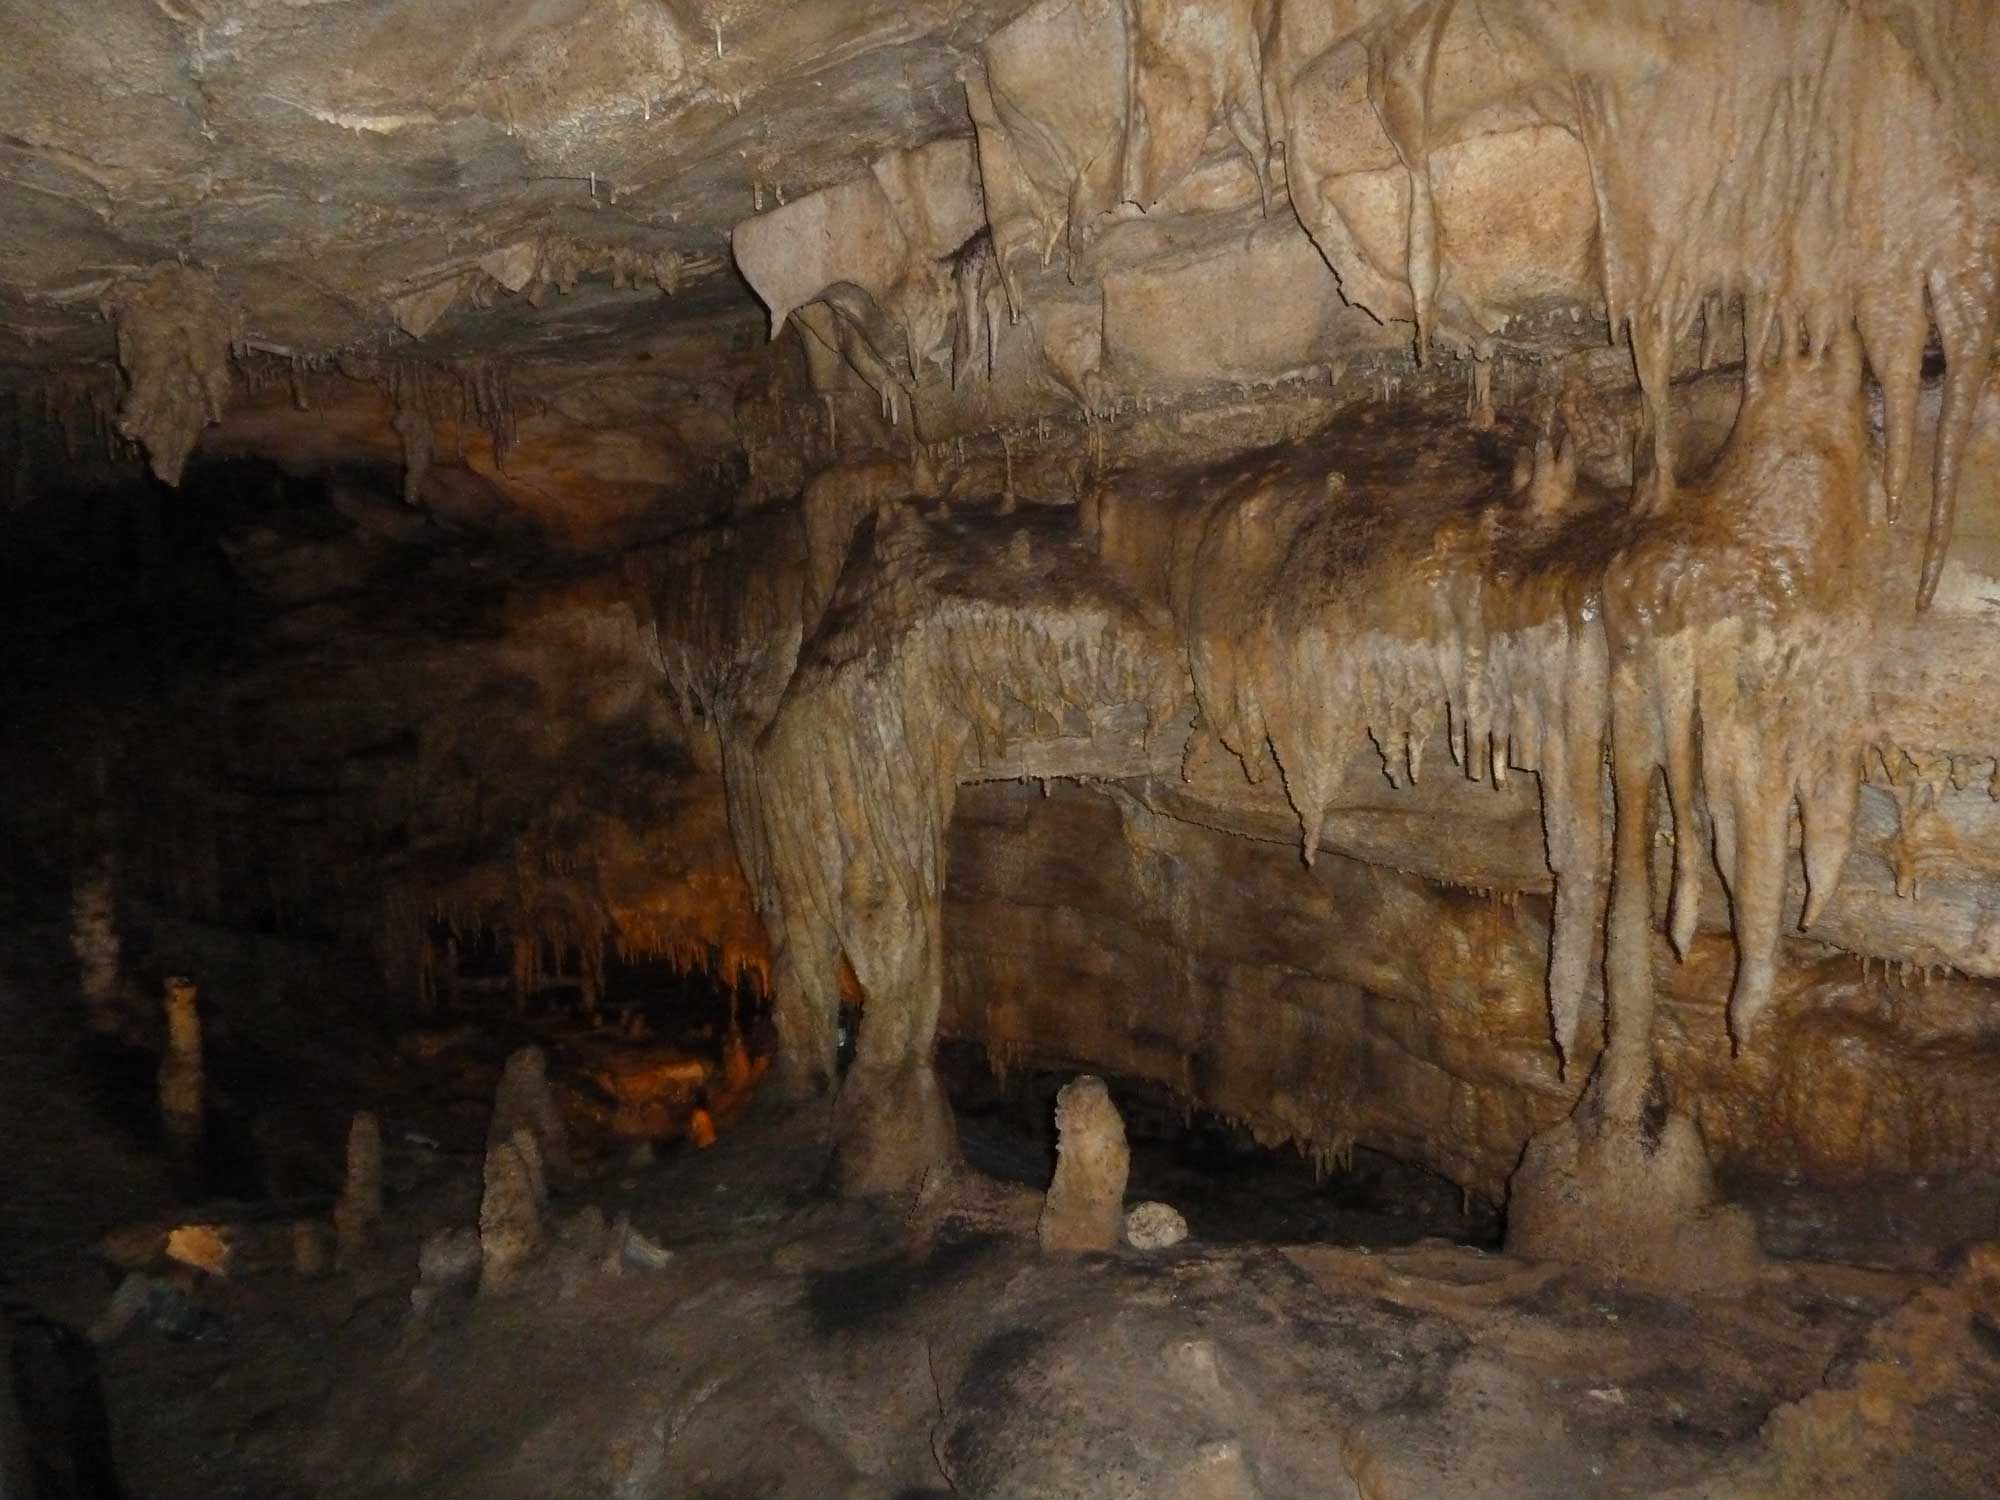 Photograph of cave features inside of Mammoth Cave National Park, Kentucky.